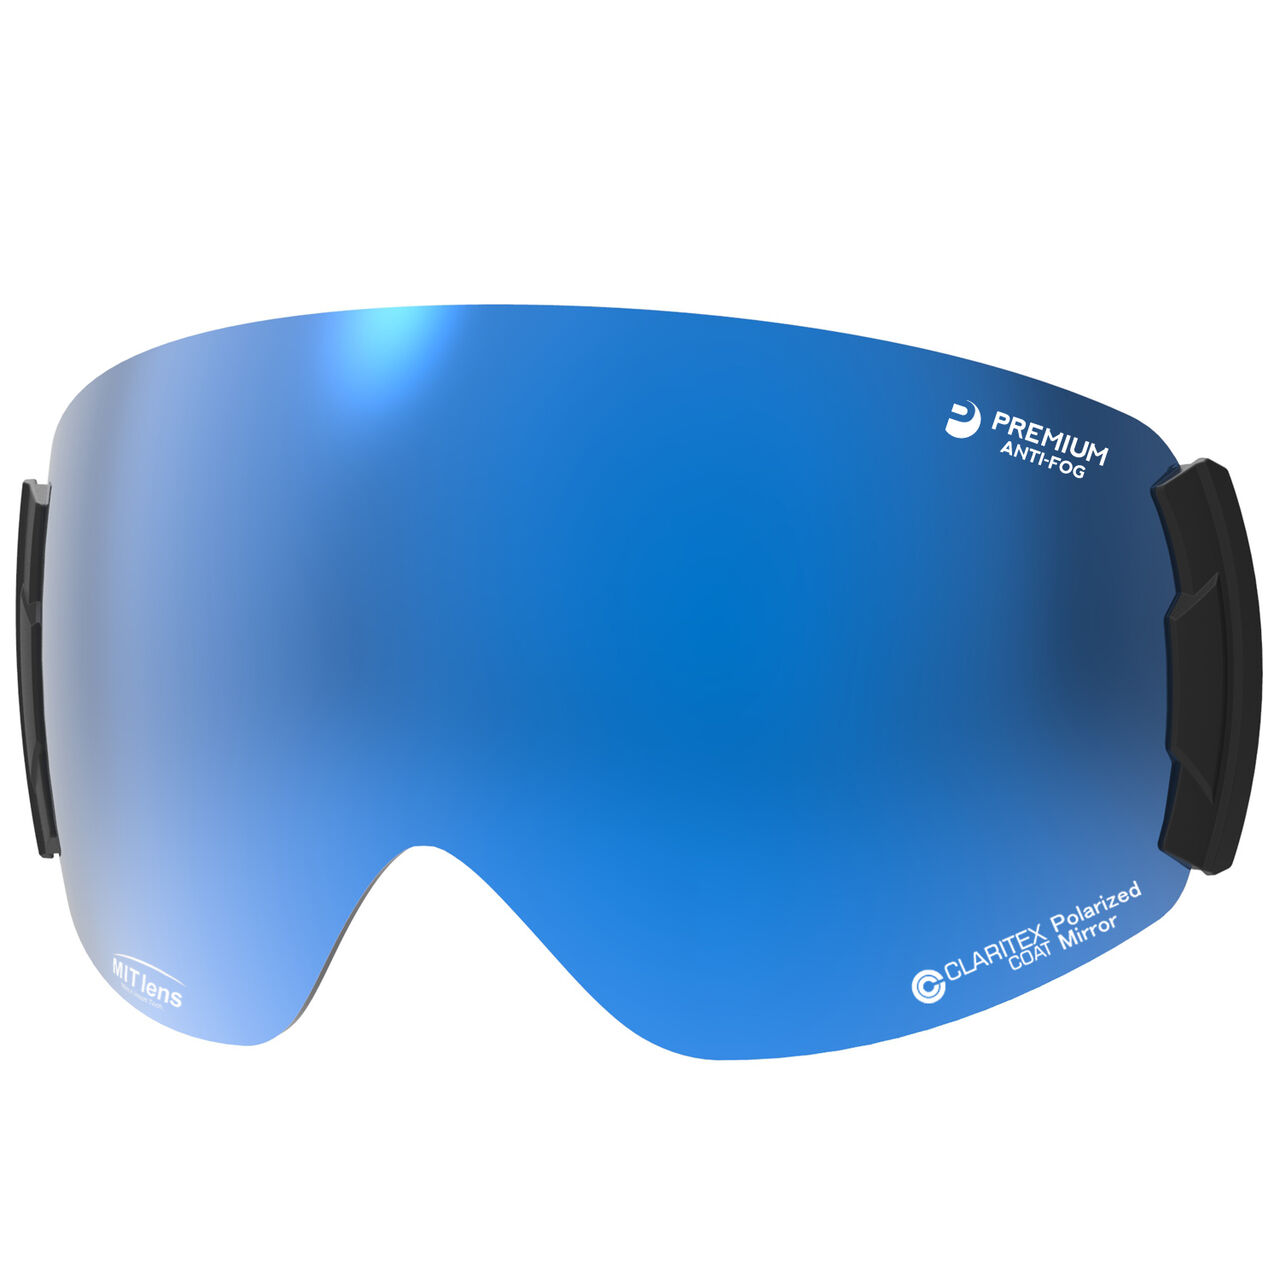 LRV-0893 MIT blue mirror x Polarized grey for ROVO,Opt7, large image number 0